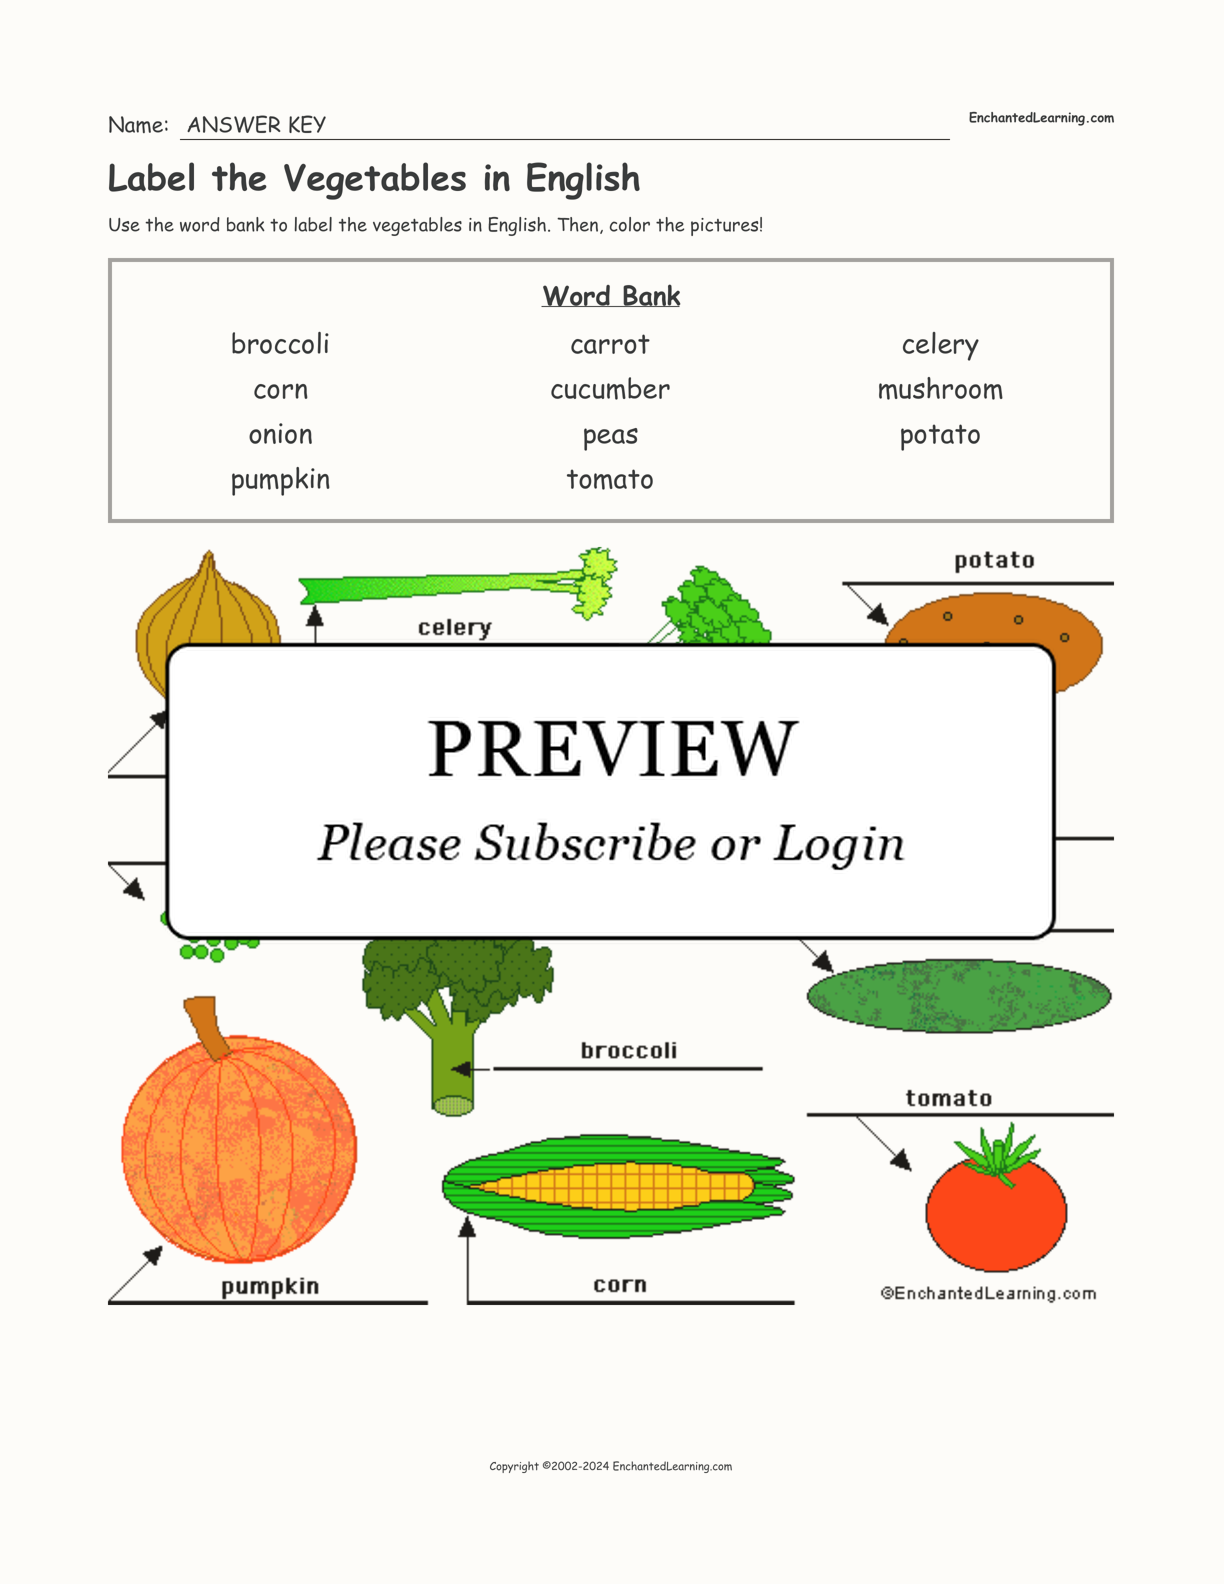 Label the Vegetables in English interactive worksheet page 2